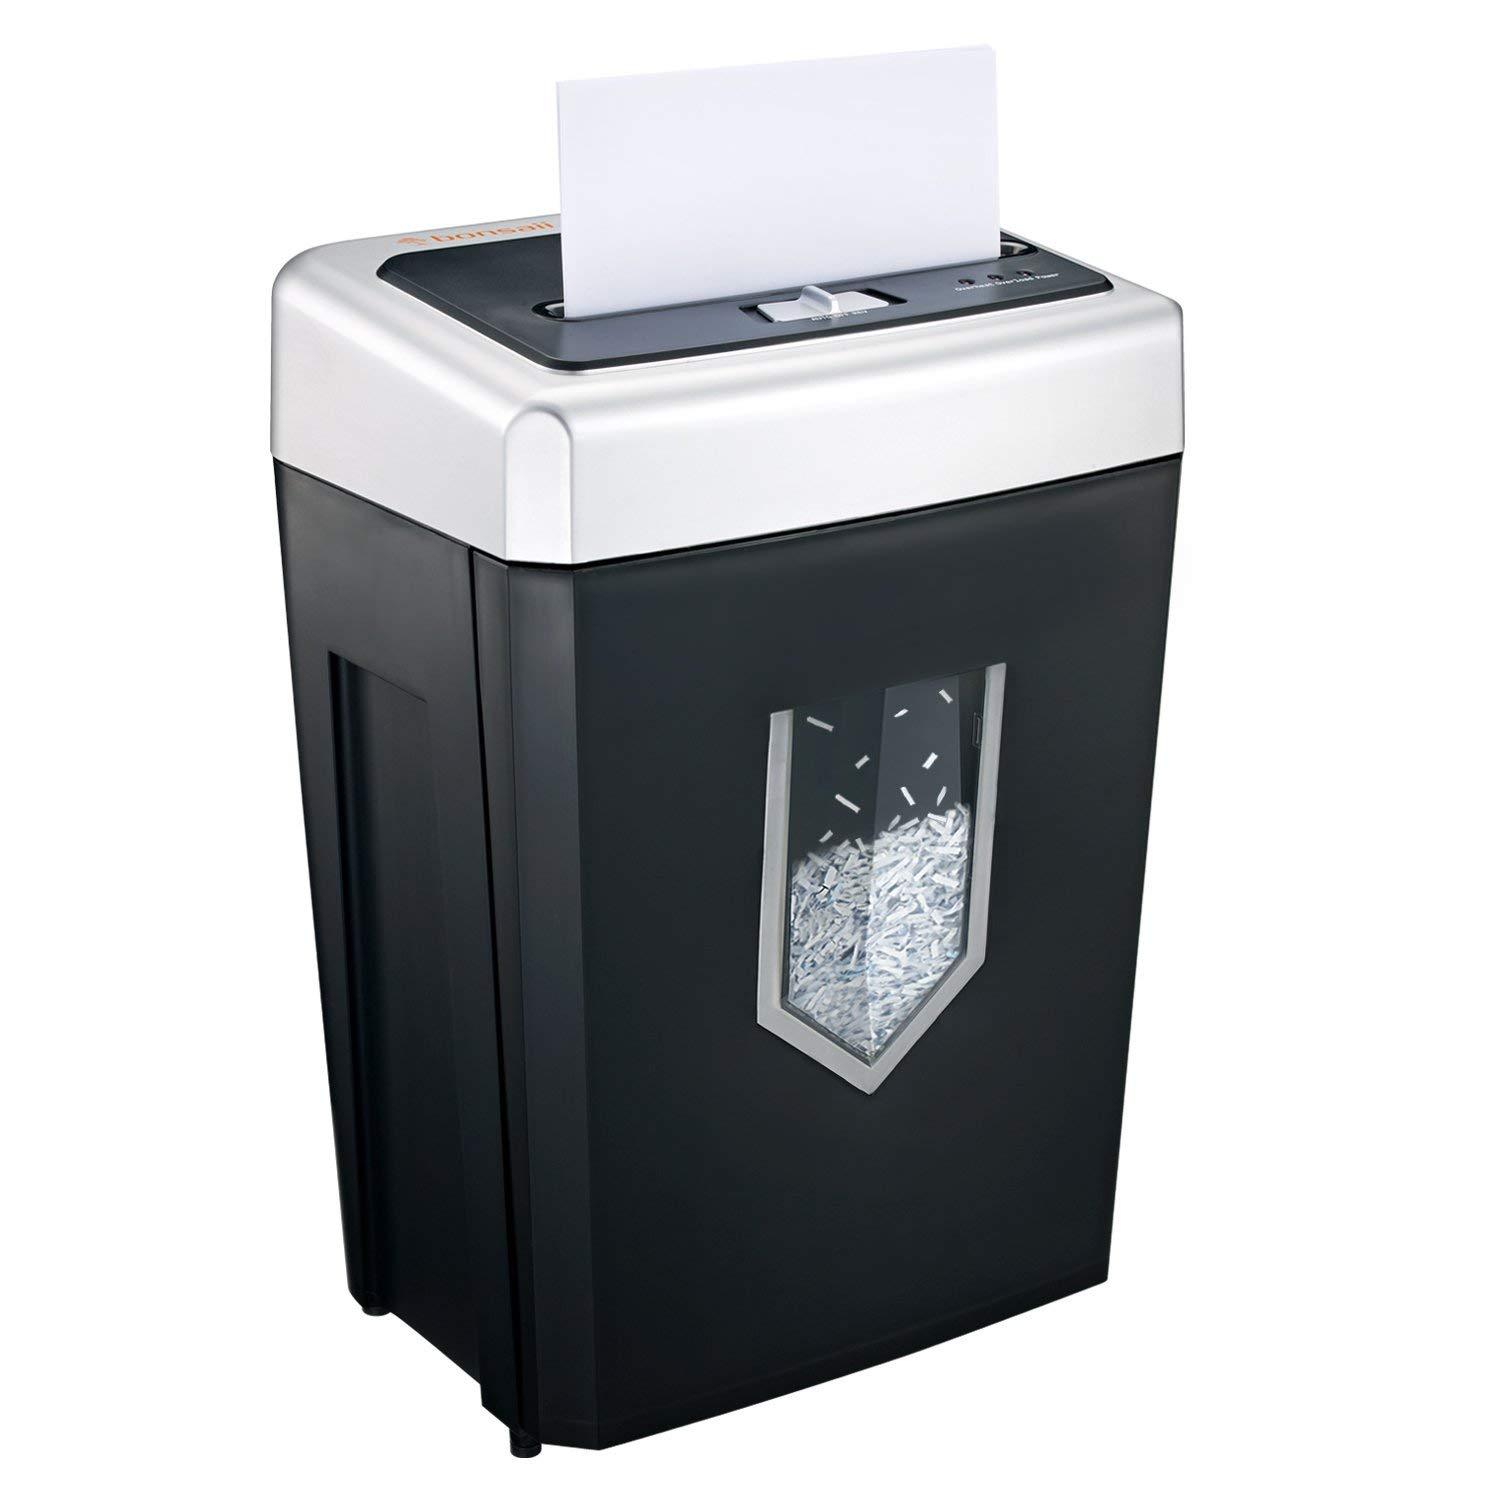 Primary image for Bonsaii 14-Sheet Cross-Cut Heavy Duty Paper Shredder 30 Minutes Duty Cycle C169-